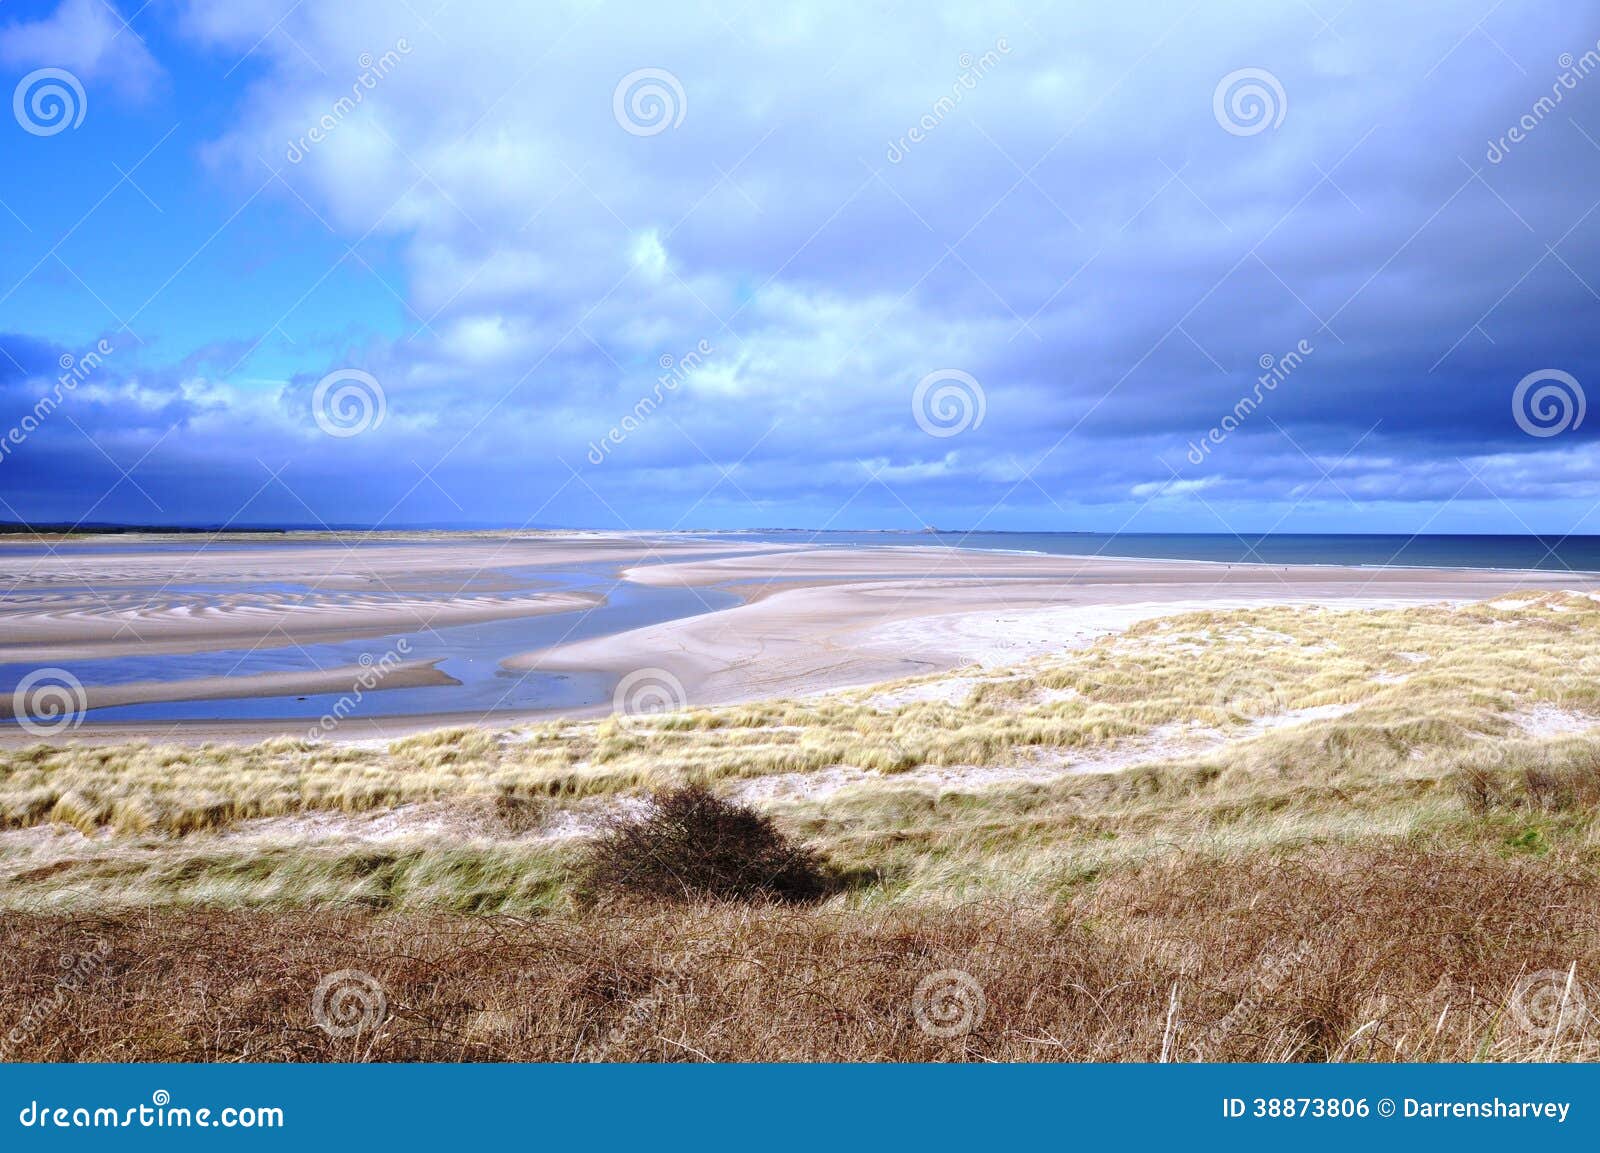 budle bay in northumberland